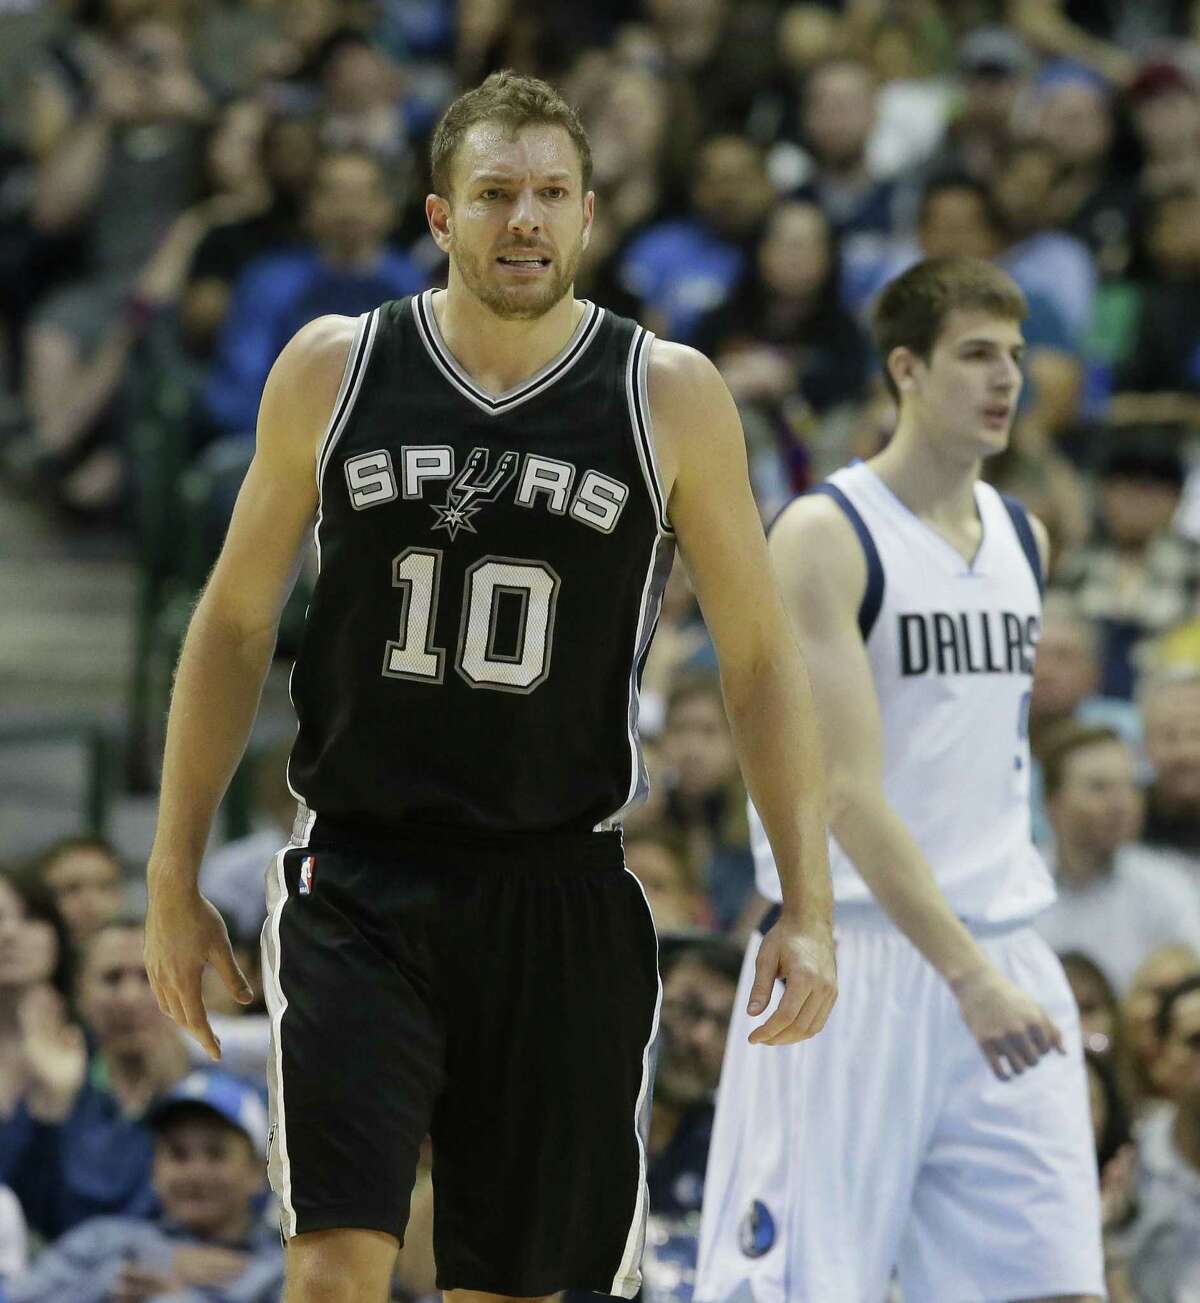 San Antonio Spurs forward David Lee (10) heads to the bench for a time out during the first half of an NBA basketball game against the Dallas Mavericks in Dallas, Friday, April 7, 2017. (AP Photo/LM Otero)